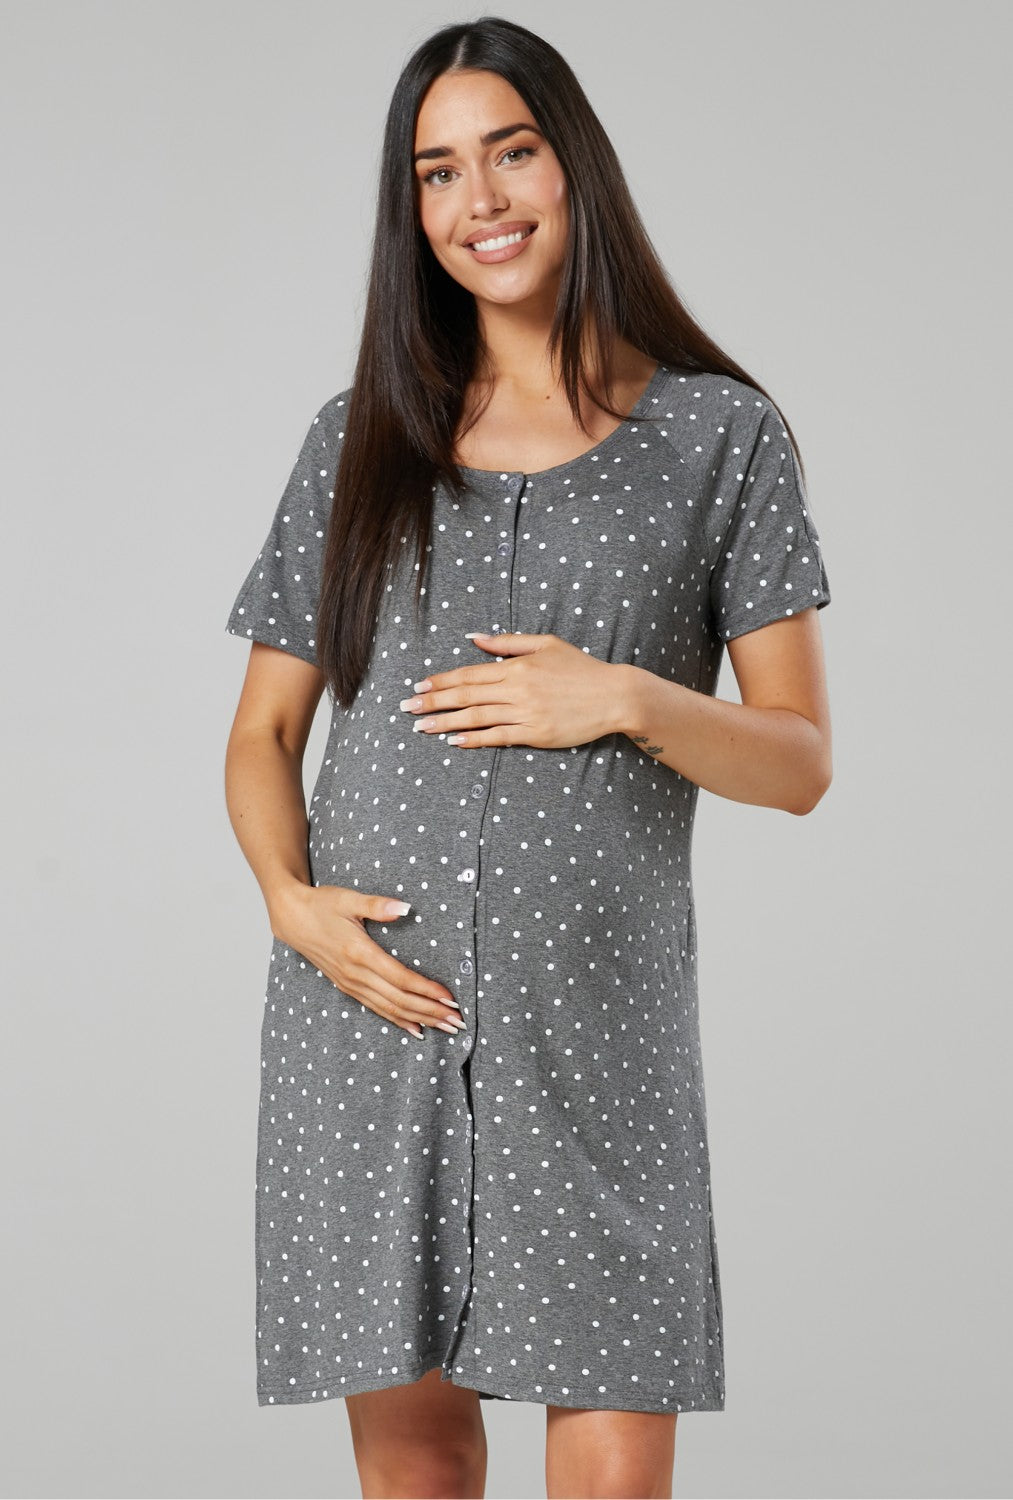 Maternity Breastfeeding Nightdress for Labour 2-pack